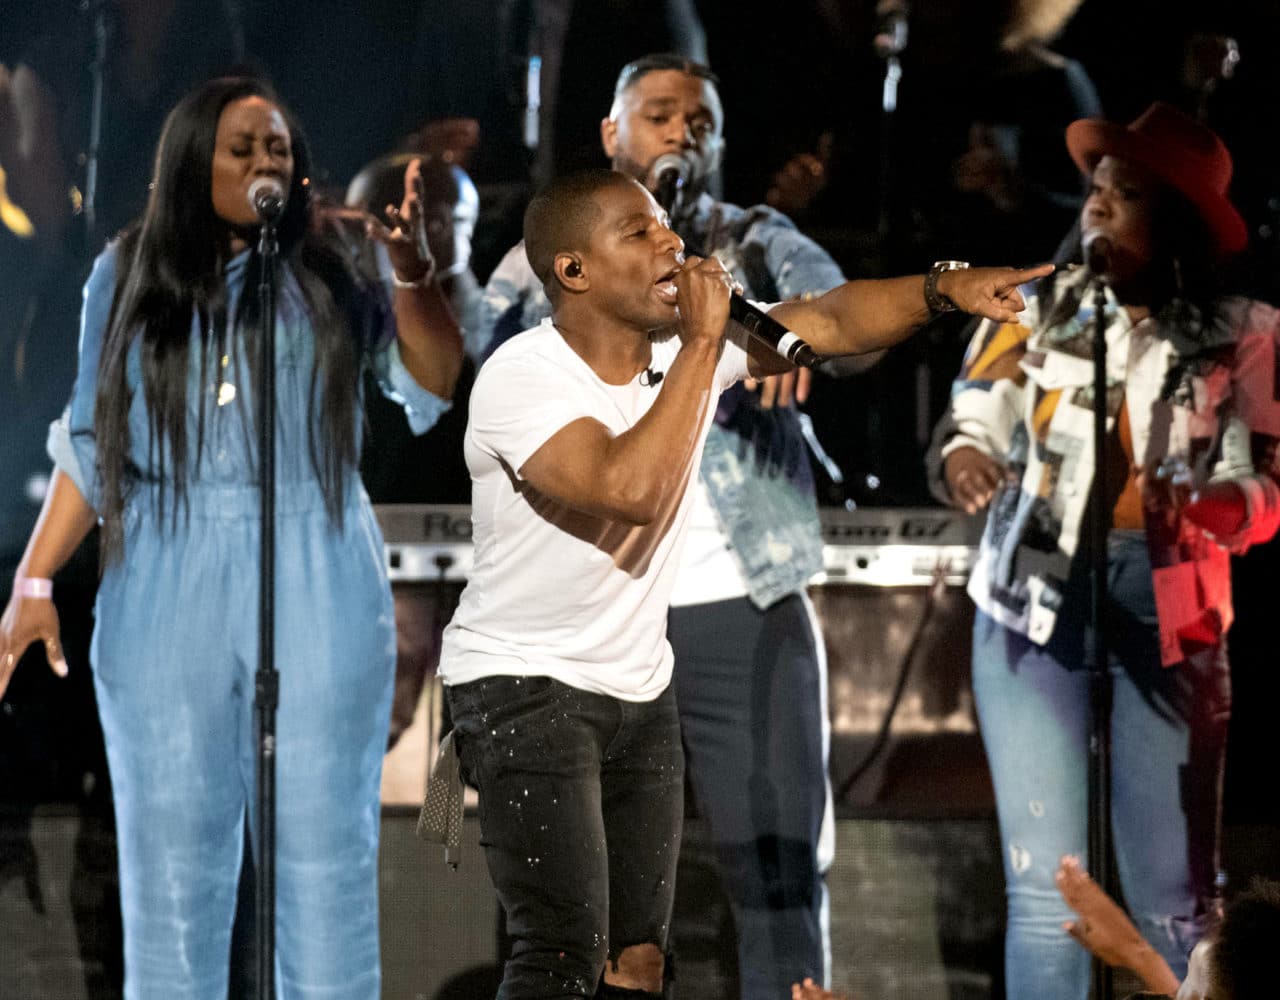 The Biggest Night in Gospel Music Airs on BET This Sunday